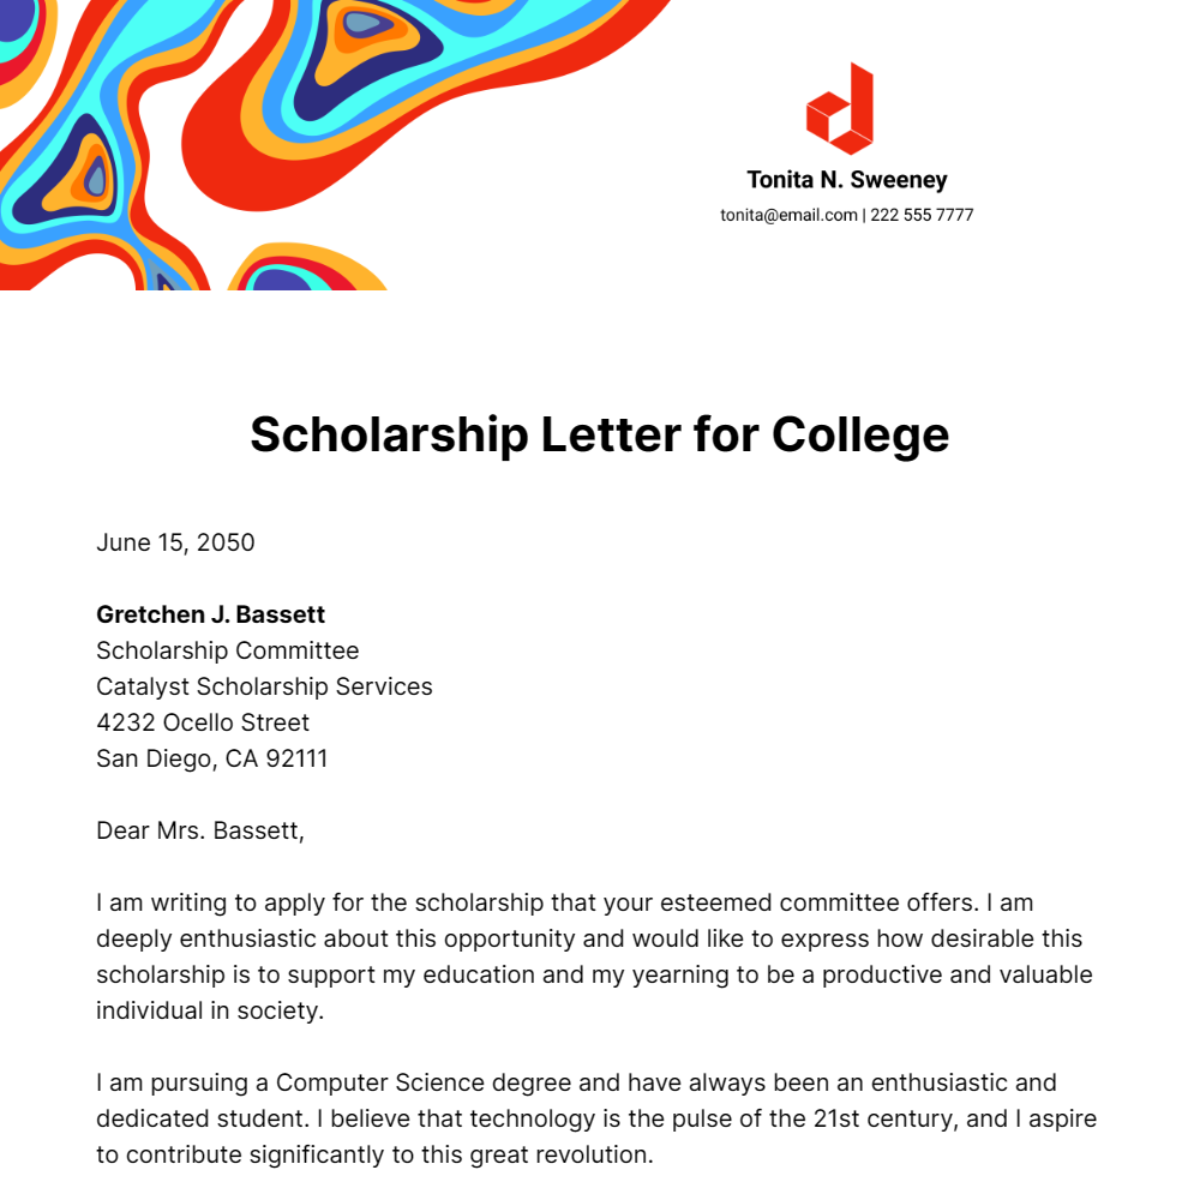 Scholarship Letter for College Template